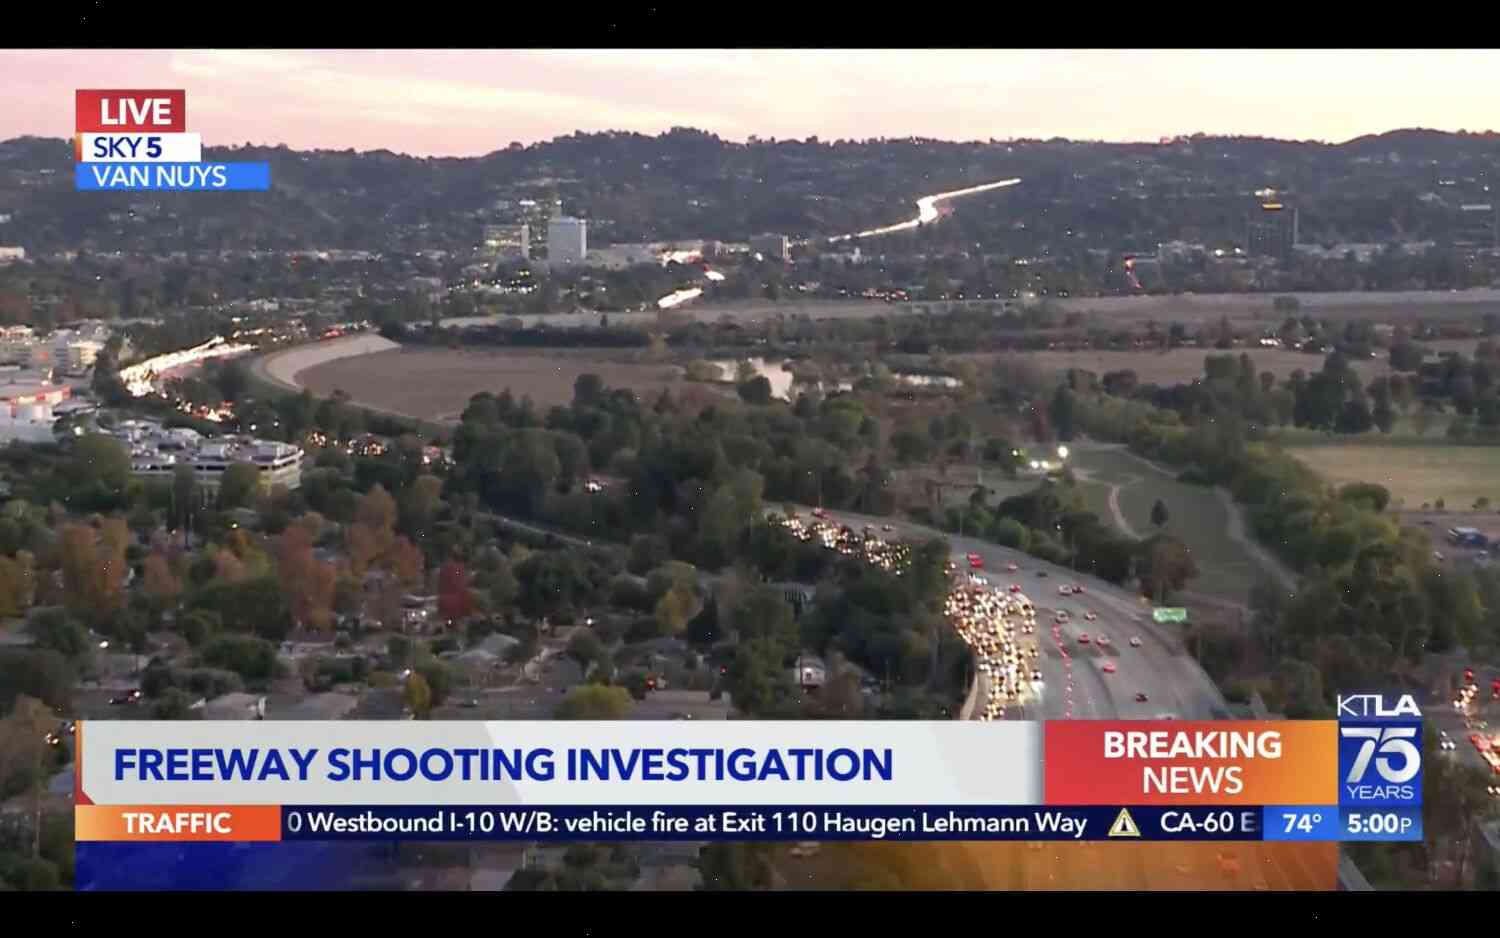 The Los Angeles Police Department Identifies the Shooter as Antonio Dominguez